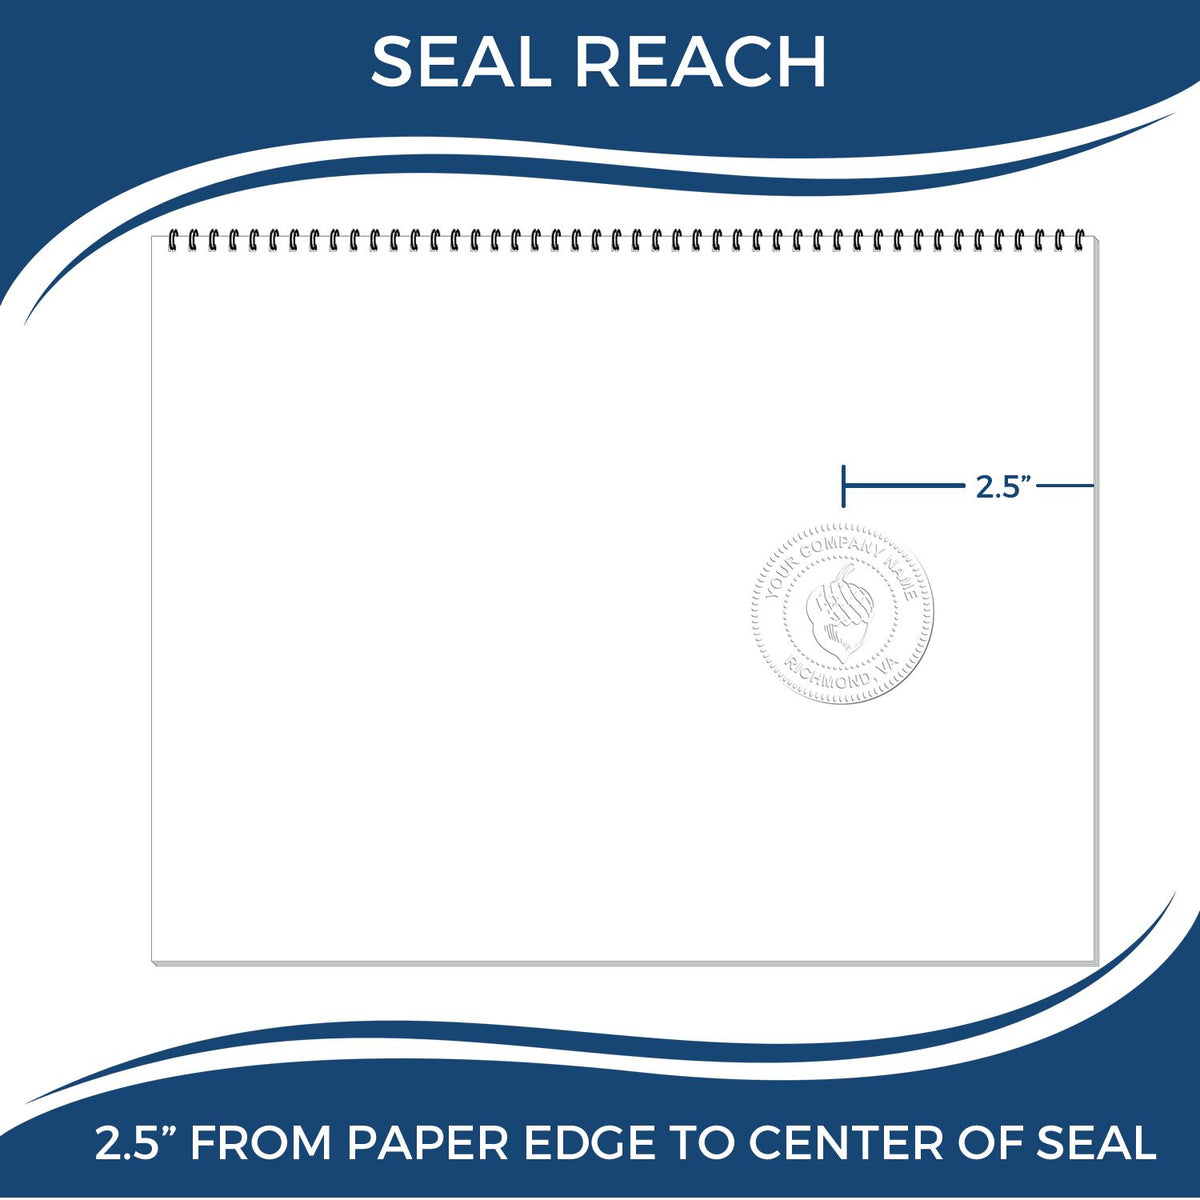 An infographic showing the seal reach which is represented by a ruler and a miniature seal image of the Heavy Duty Cast Iron Arkansas Land Surveyor Seal Embosser